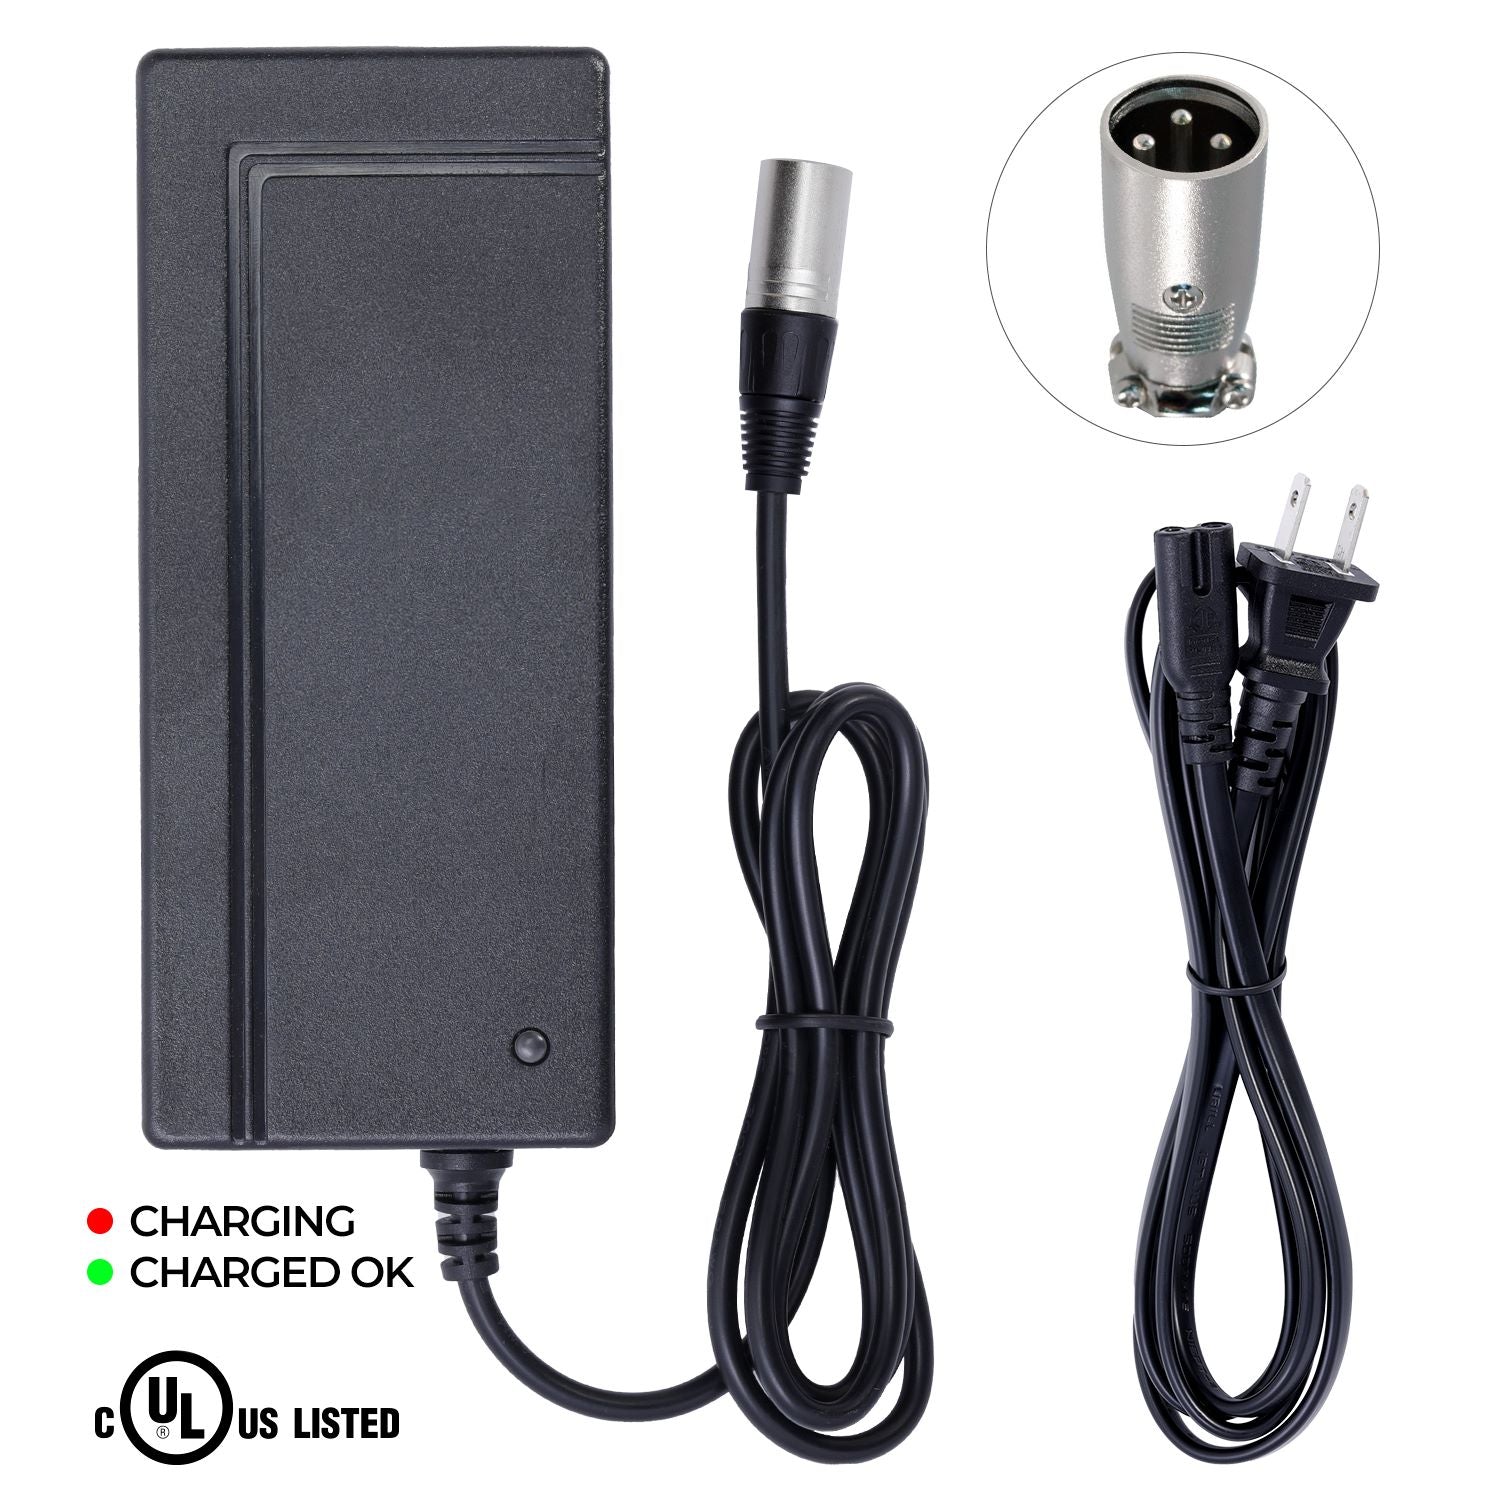 Charger for Pacelite HCF 701 Electric Scooter e-Bike